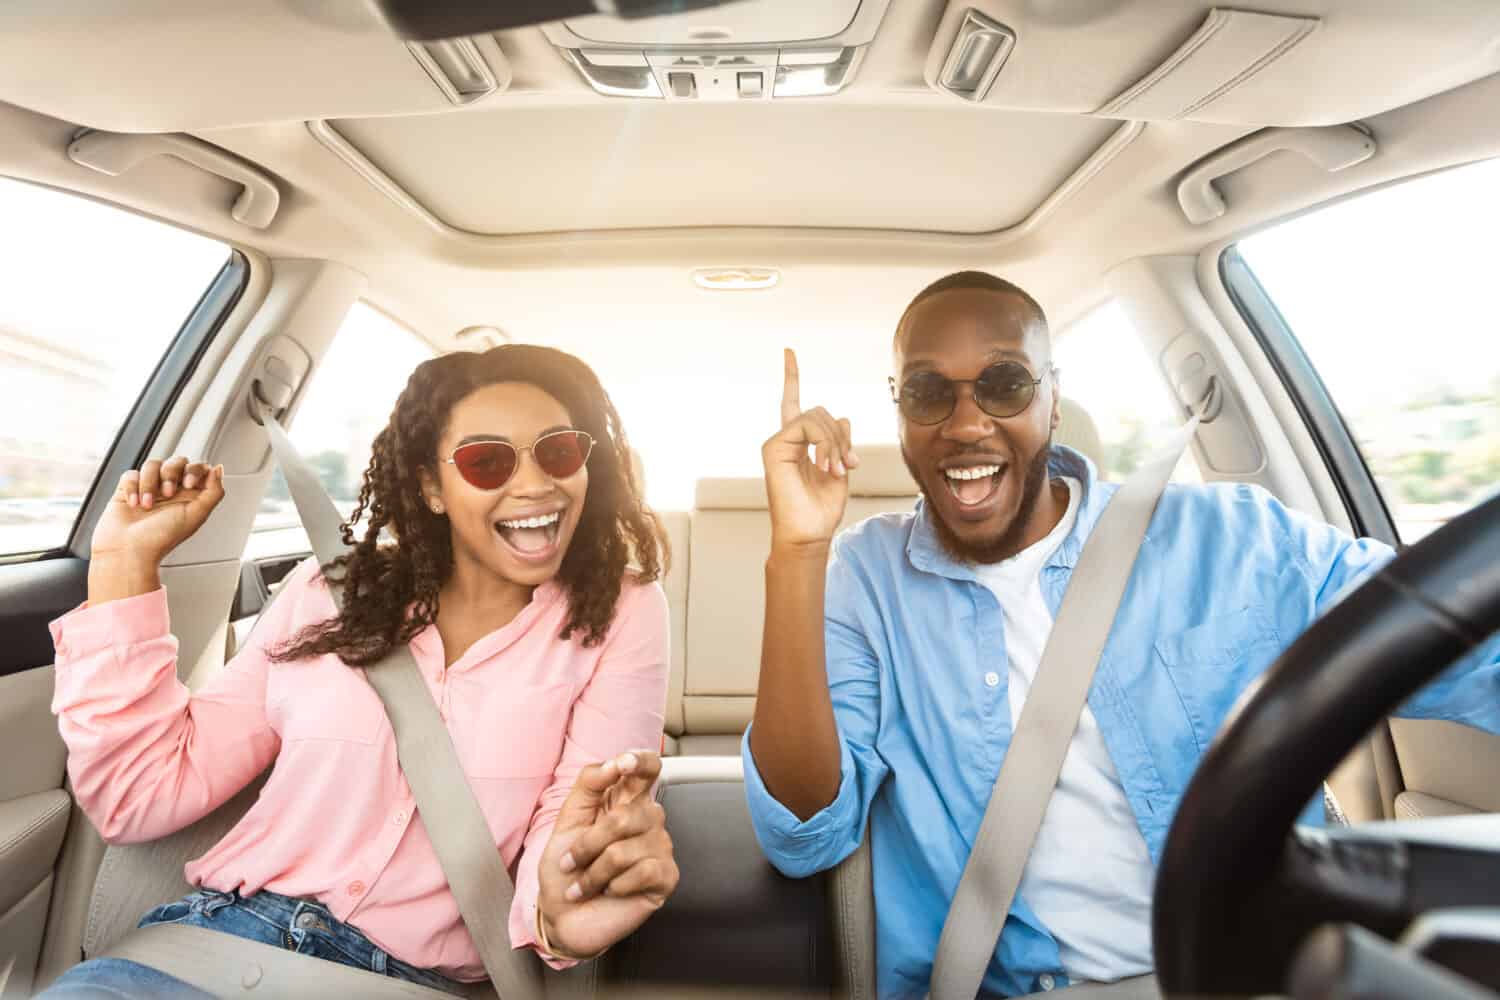 We Are Going On Vacation. Frontal view portrait of cheerful positive African American guy and lady in sunglasses driving their automobile, dancing to music and singing favorite song, looking at camera